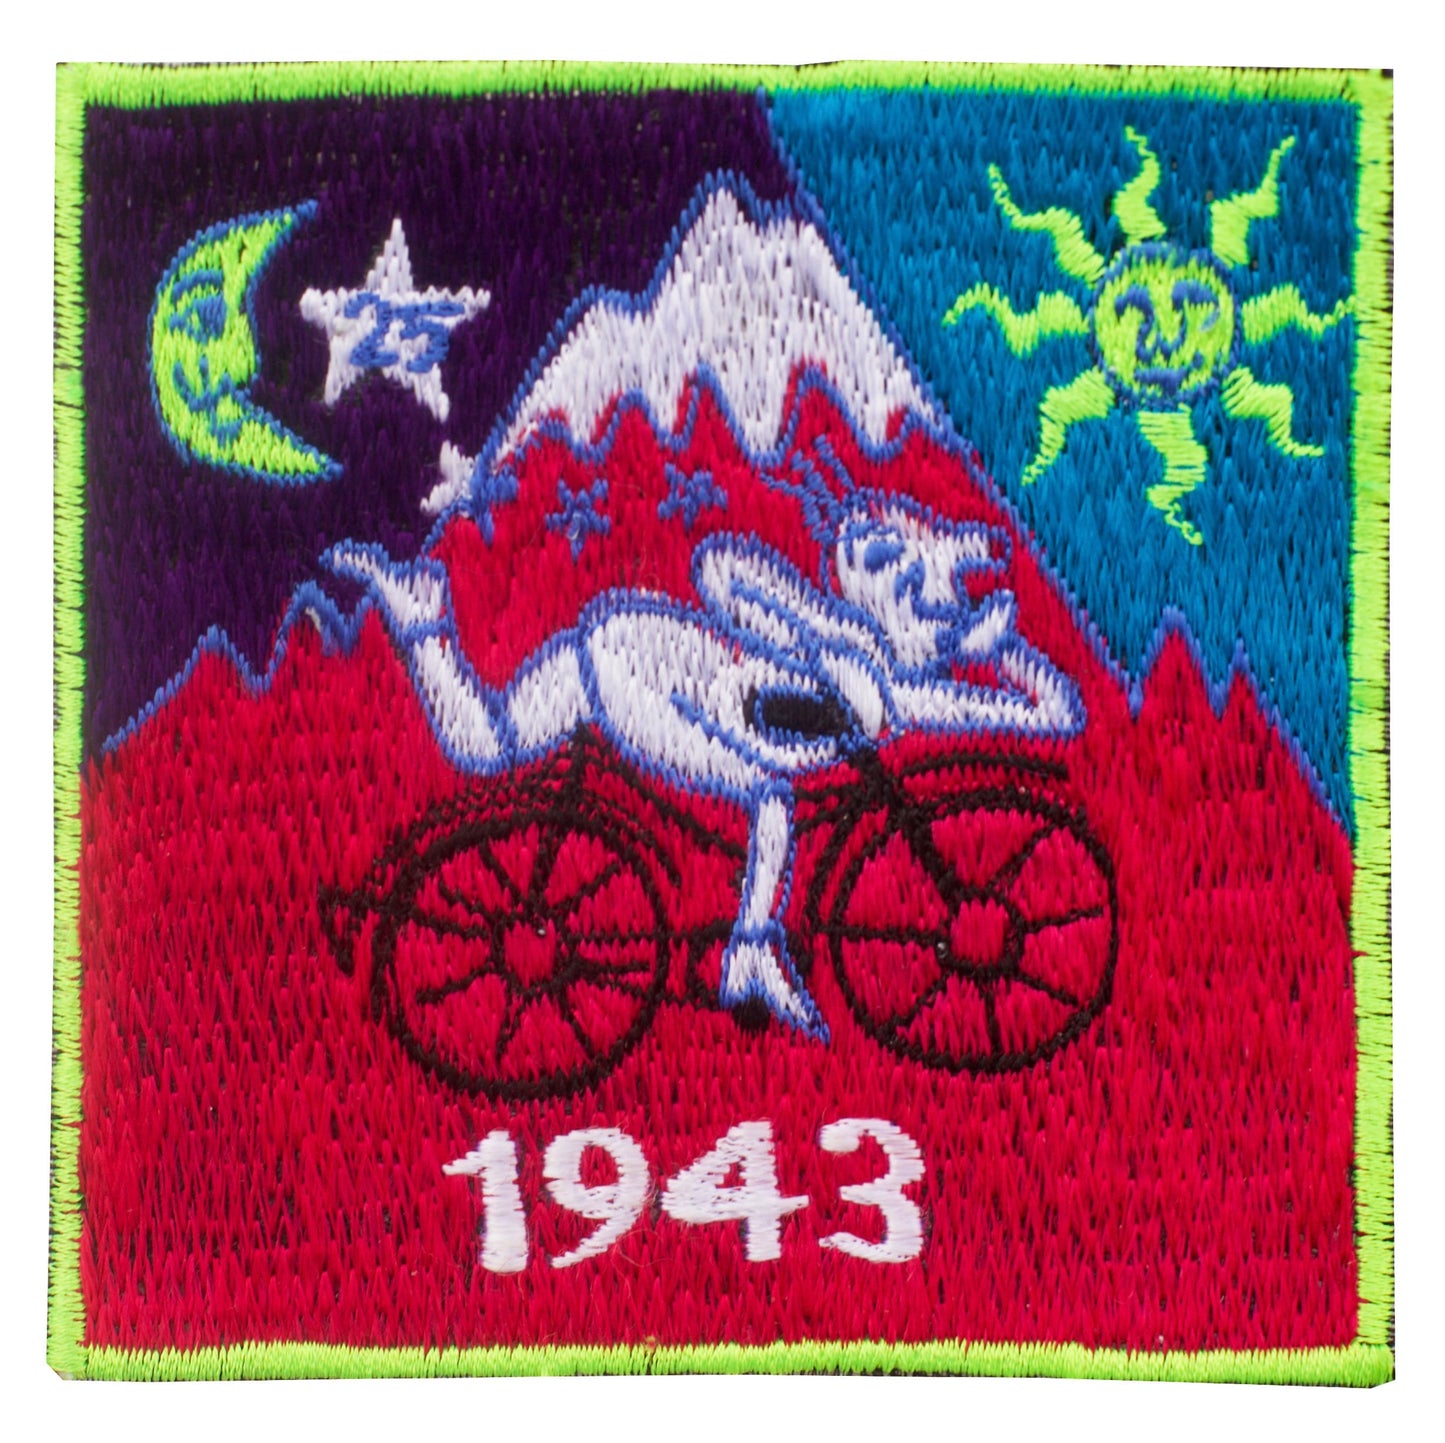 small Pink Bicycle Day Albert Hofmann 1943 LSD patch Psychedelic Trip Hippie Drug Timothy Leary Psychotherapy Divine Healing Medicine